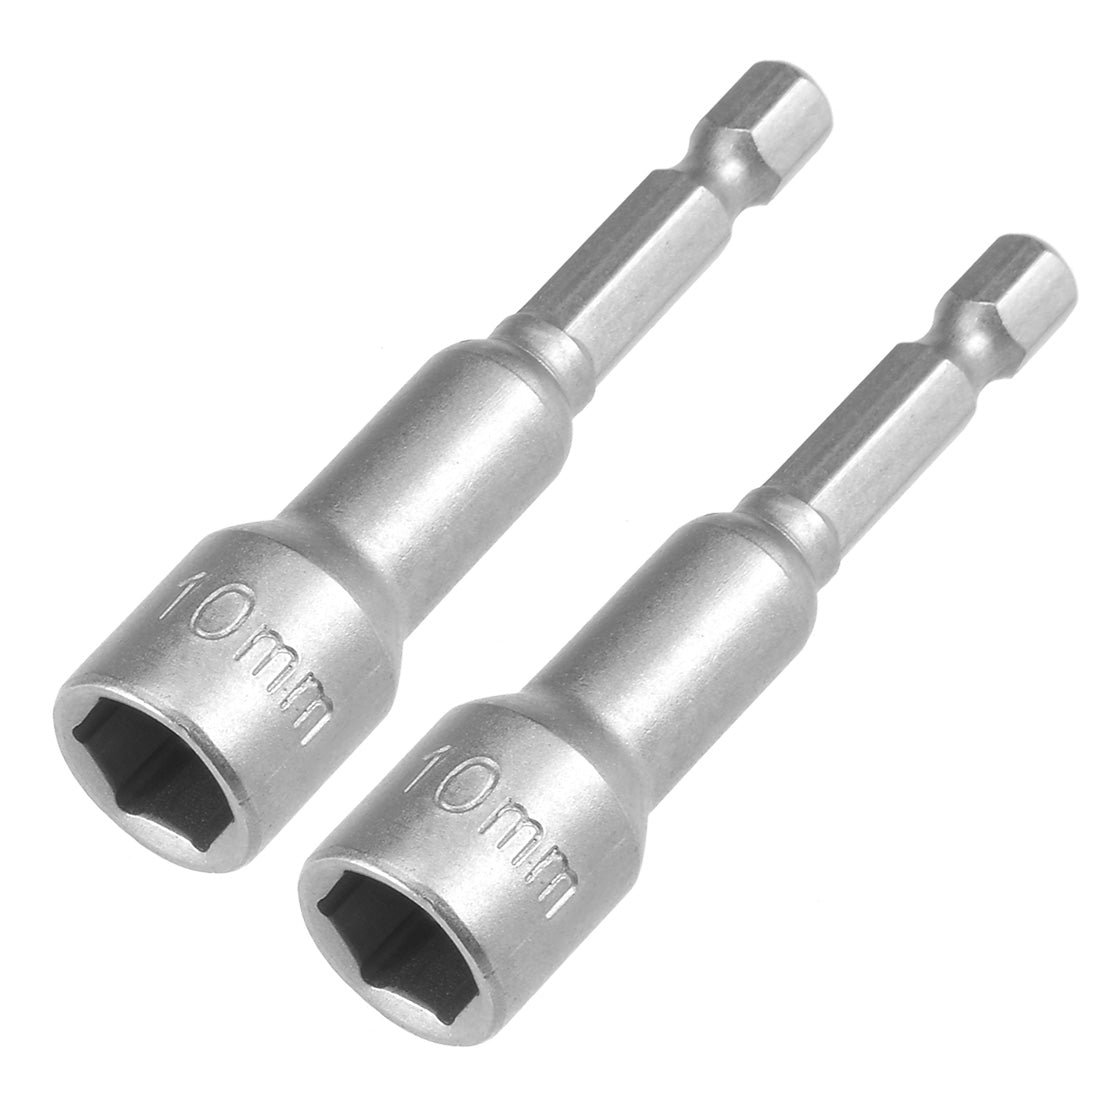 uxcell Uxcell 2 Pcs 1/4" Quick-Change Hex Shank 10mm Magnetic Nut Sockets Driver, 65mm Length